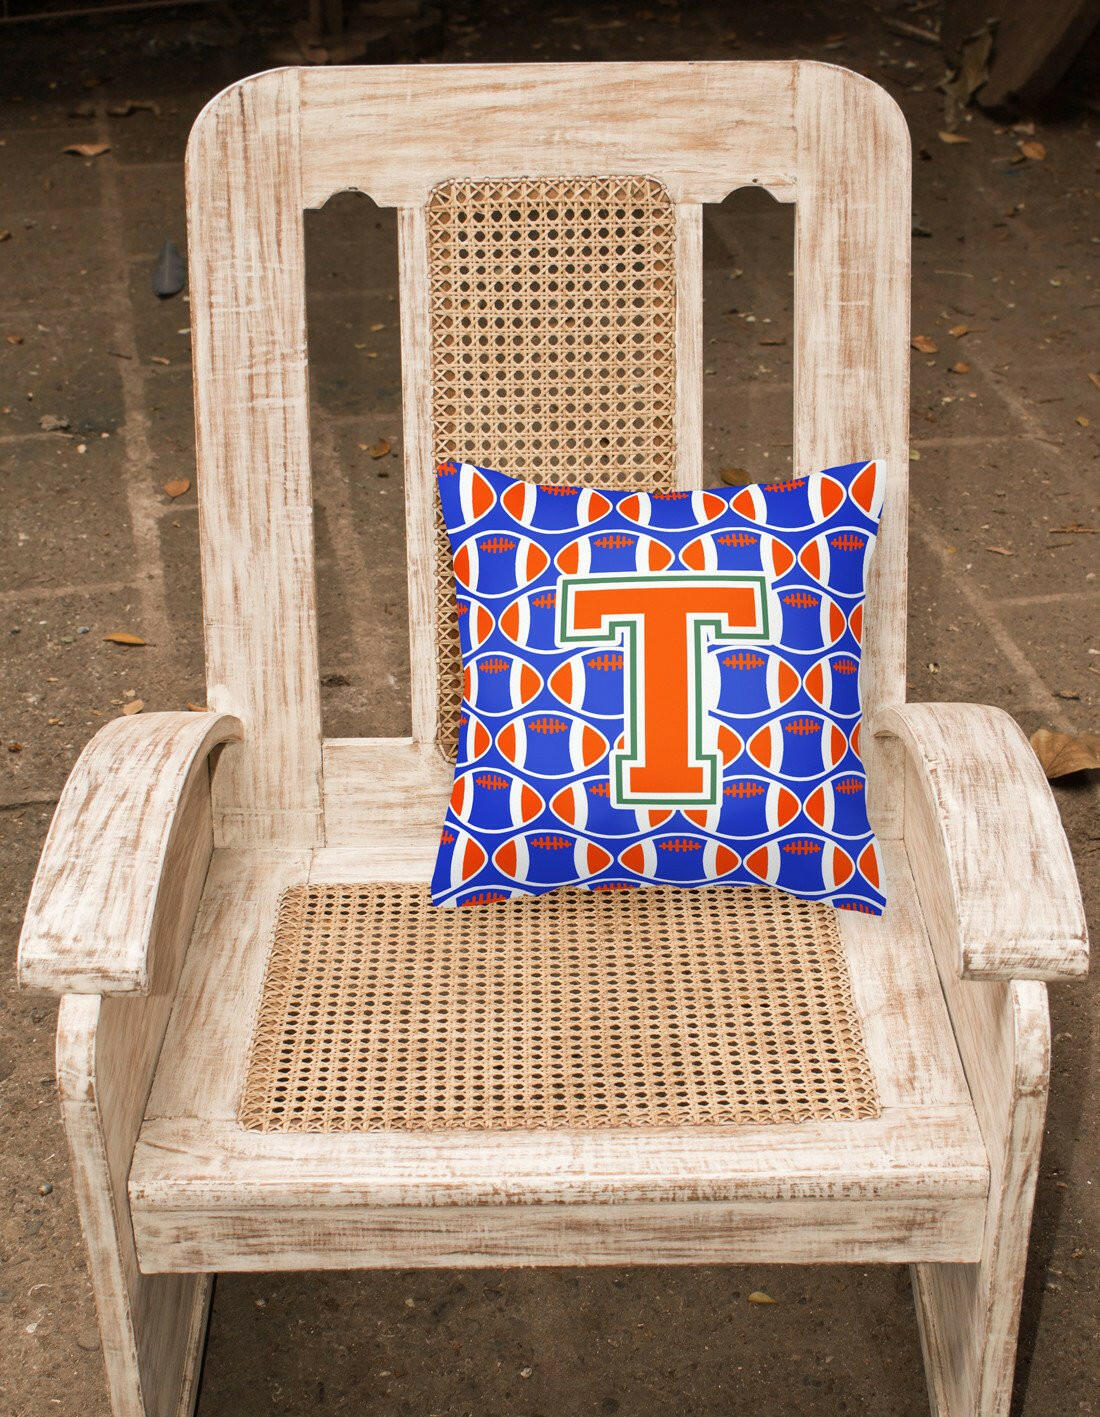 Letter T Football Green, Blue and Orange Fabric Decorative Pillow CJ1083-TPW1414 by Caroline's Treasures